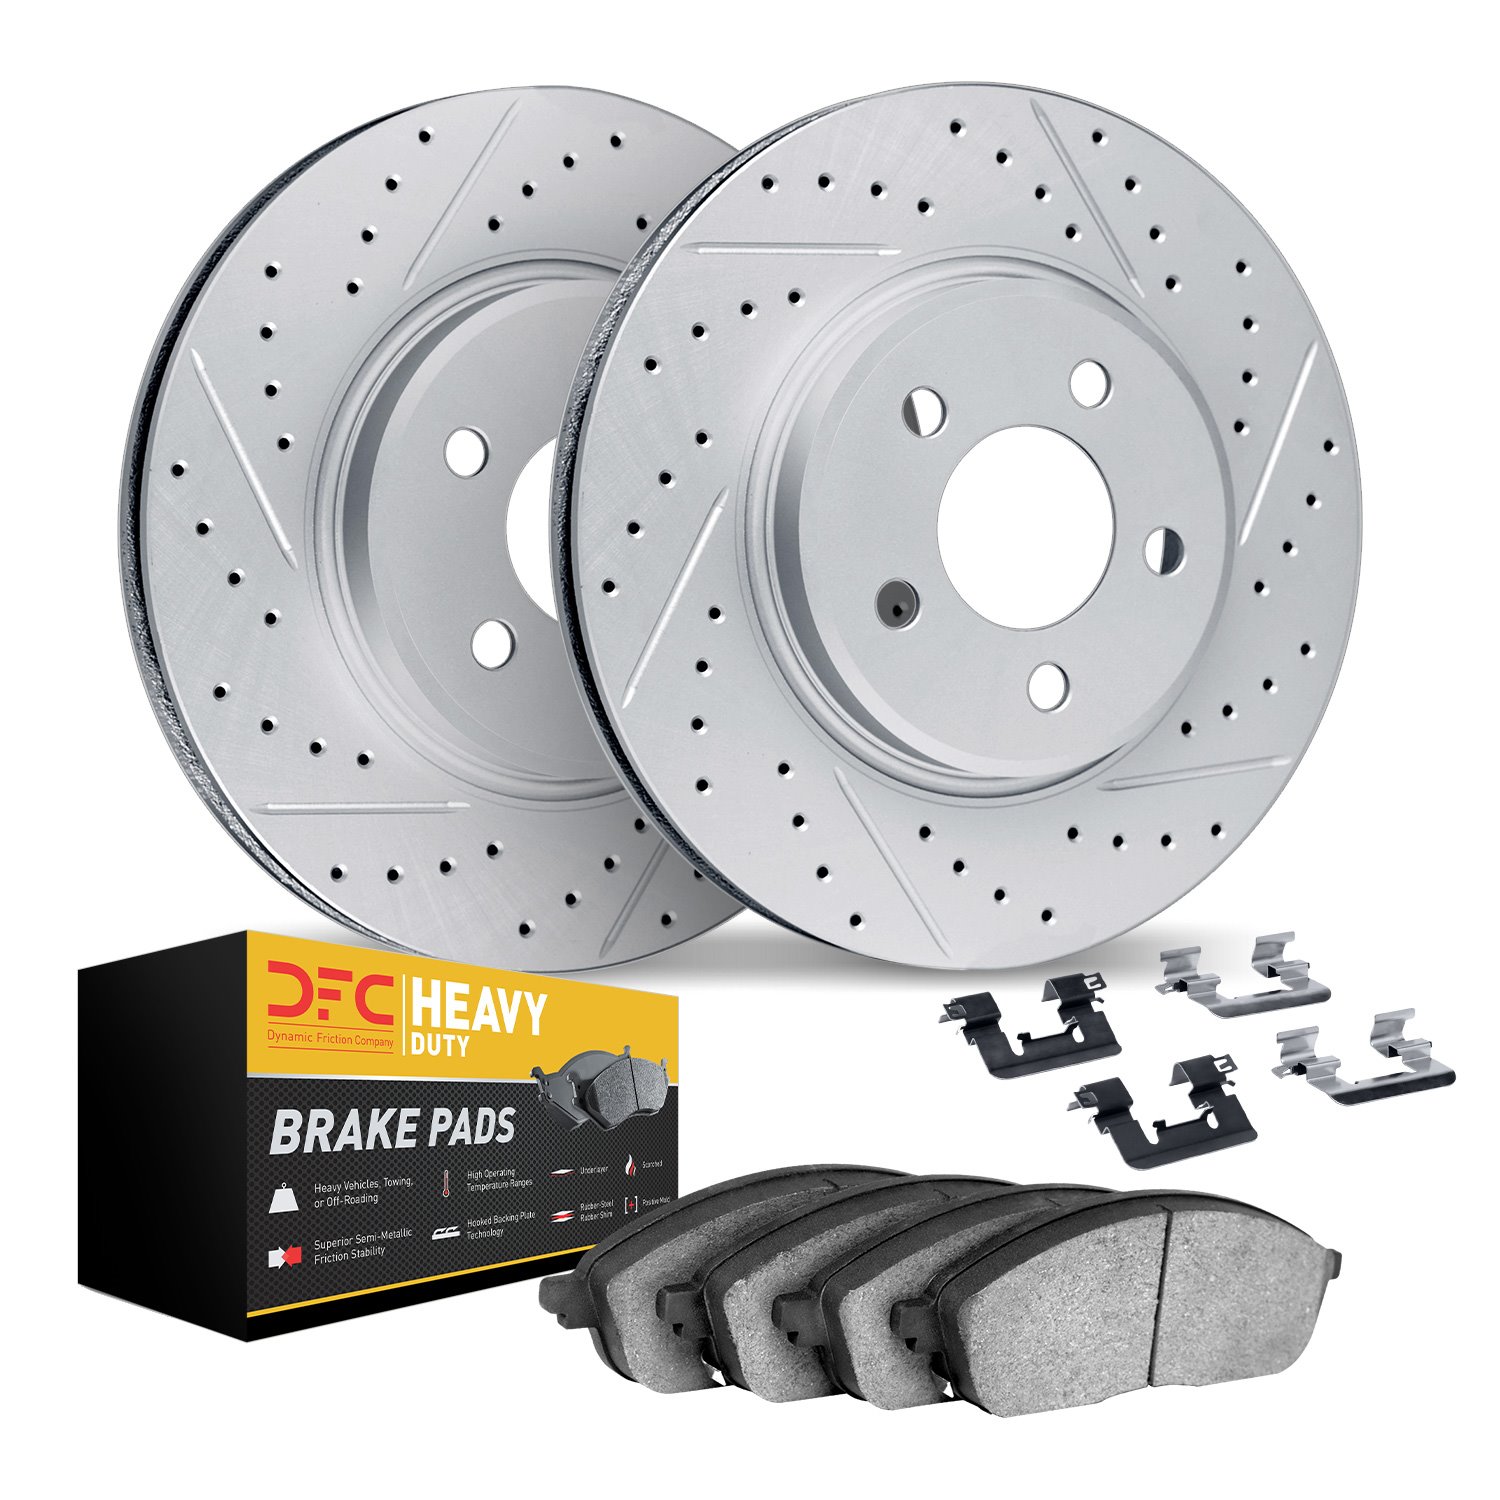 2212-99084 Geoperformance Drilled/Slotted Rotors w/Heavy-Duty Pads Kit & Hardware, 1995-1997 Ford/Lincoln/Mercury/Mazda, Positio